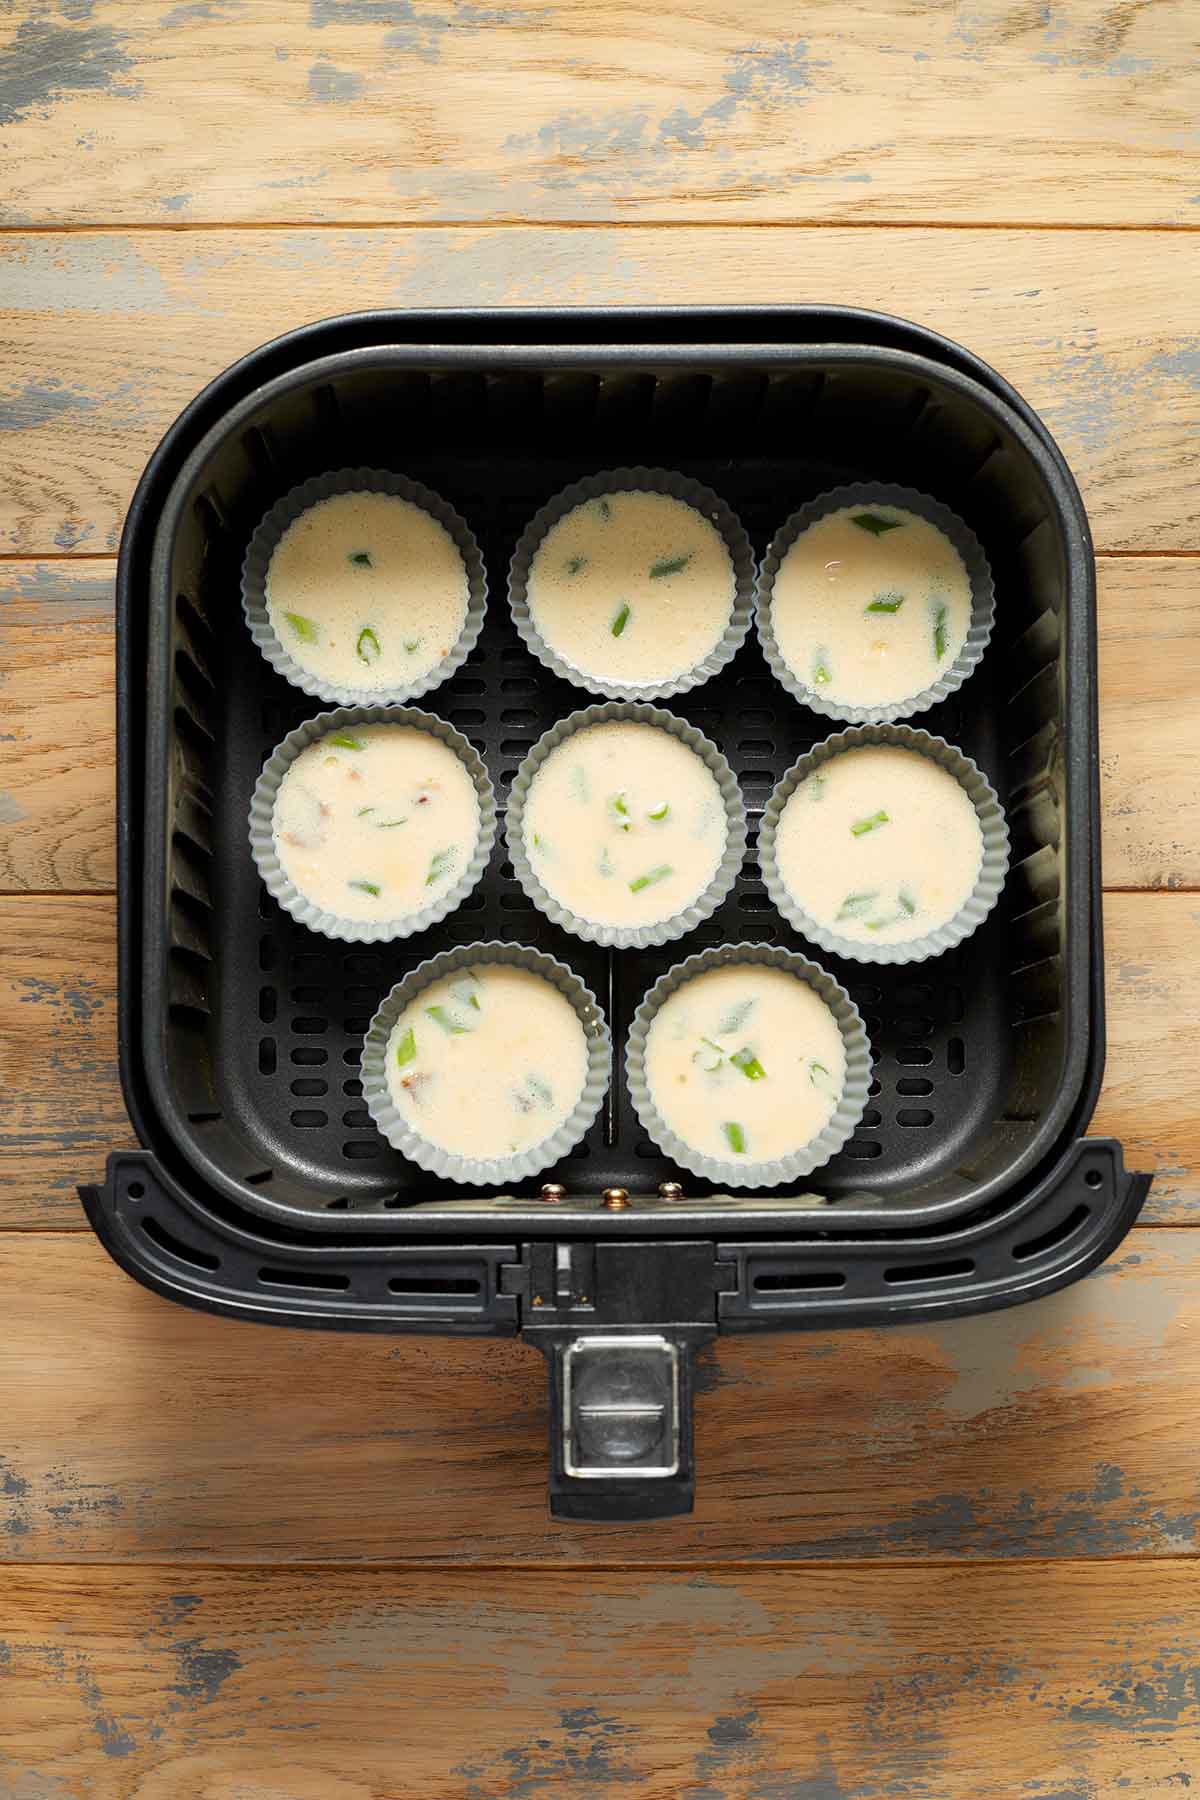 Silicone muffin cups filled with egg mixture and placed in the air fryer basket.